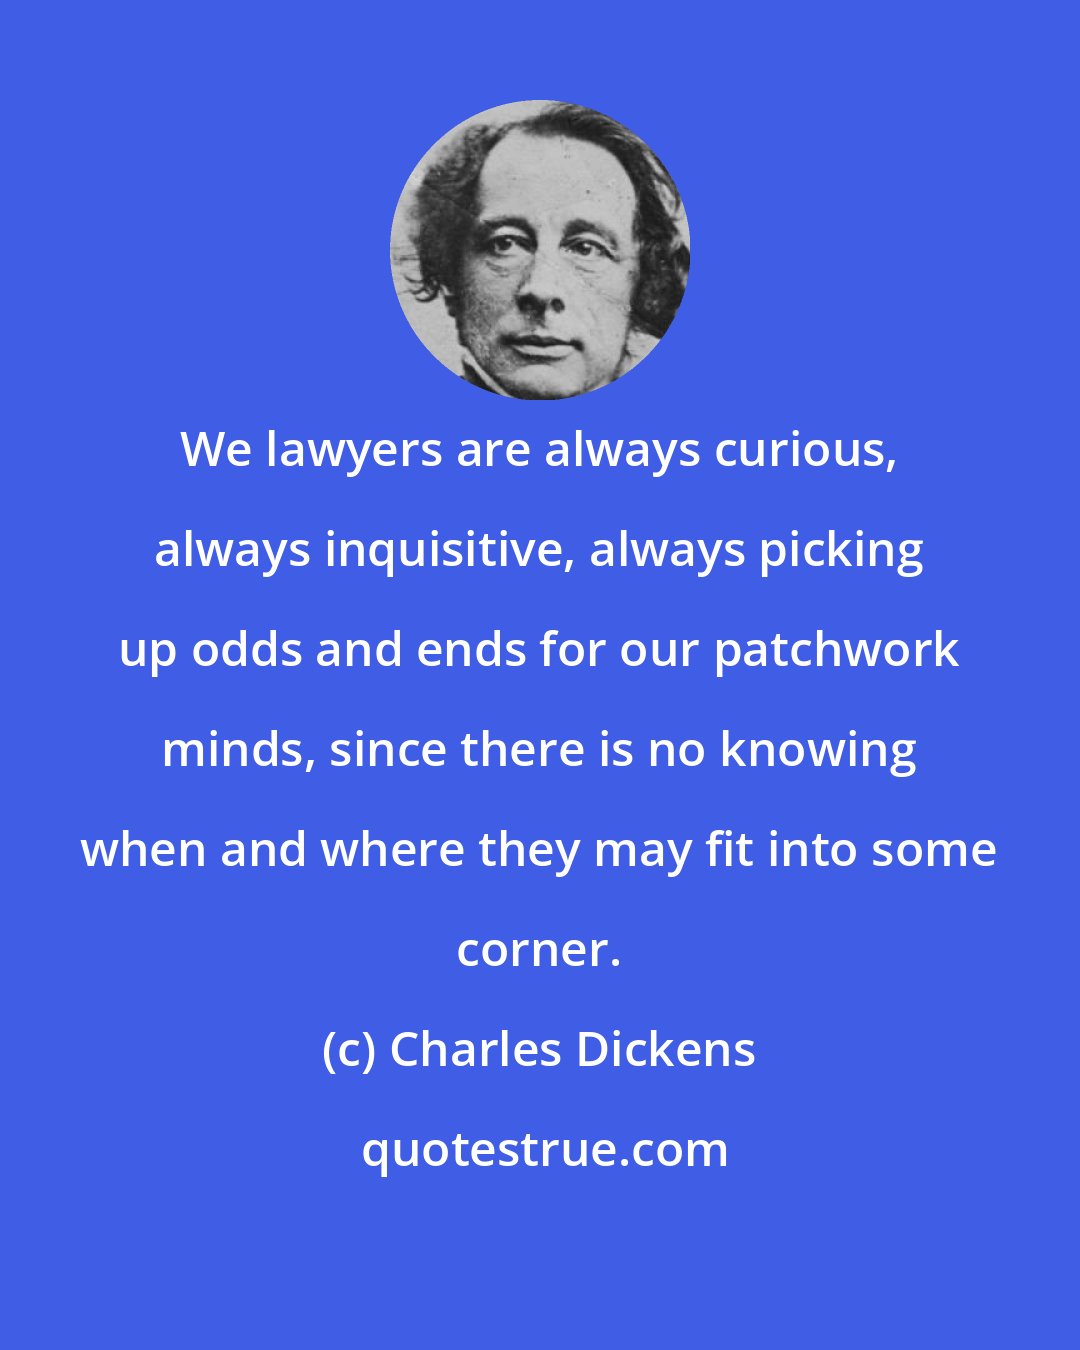 Charles Dickens: We lawyers are always curious, always inquisitive, always picking up odds and ends for our patchwork minds, since there is no knowing when and where they may fit into some corner.